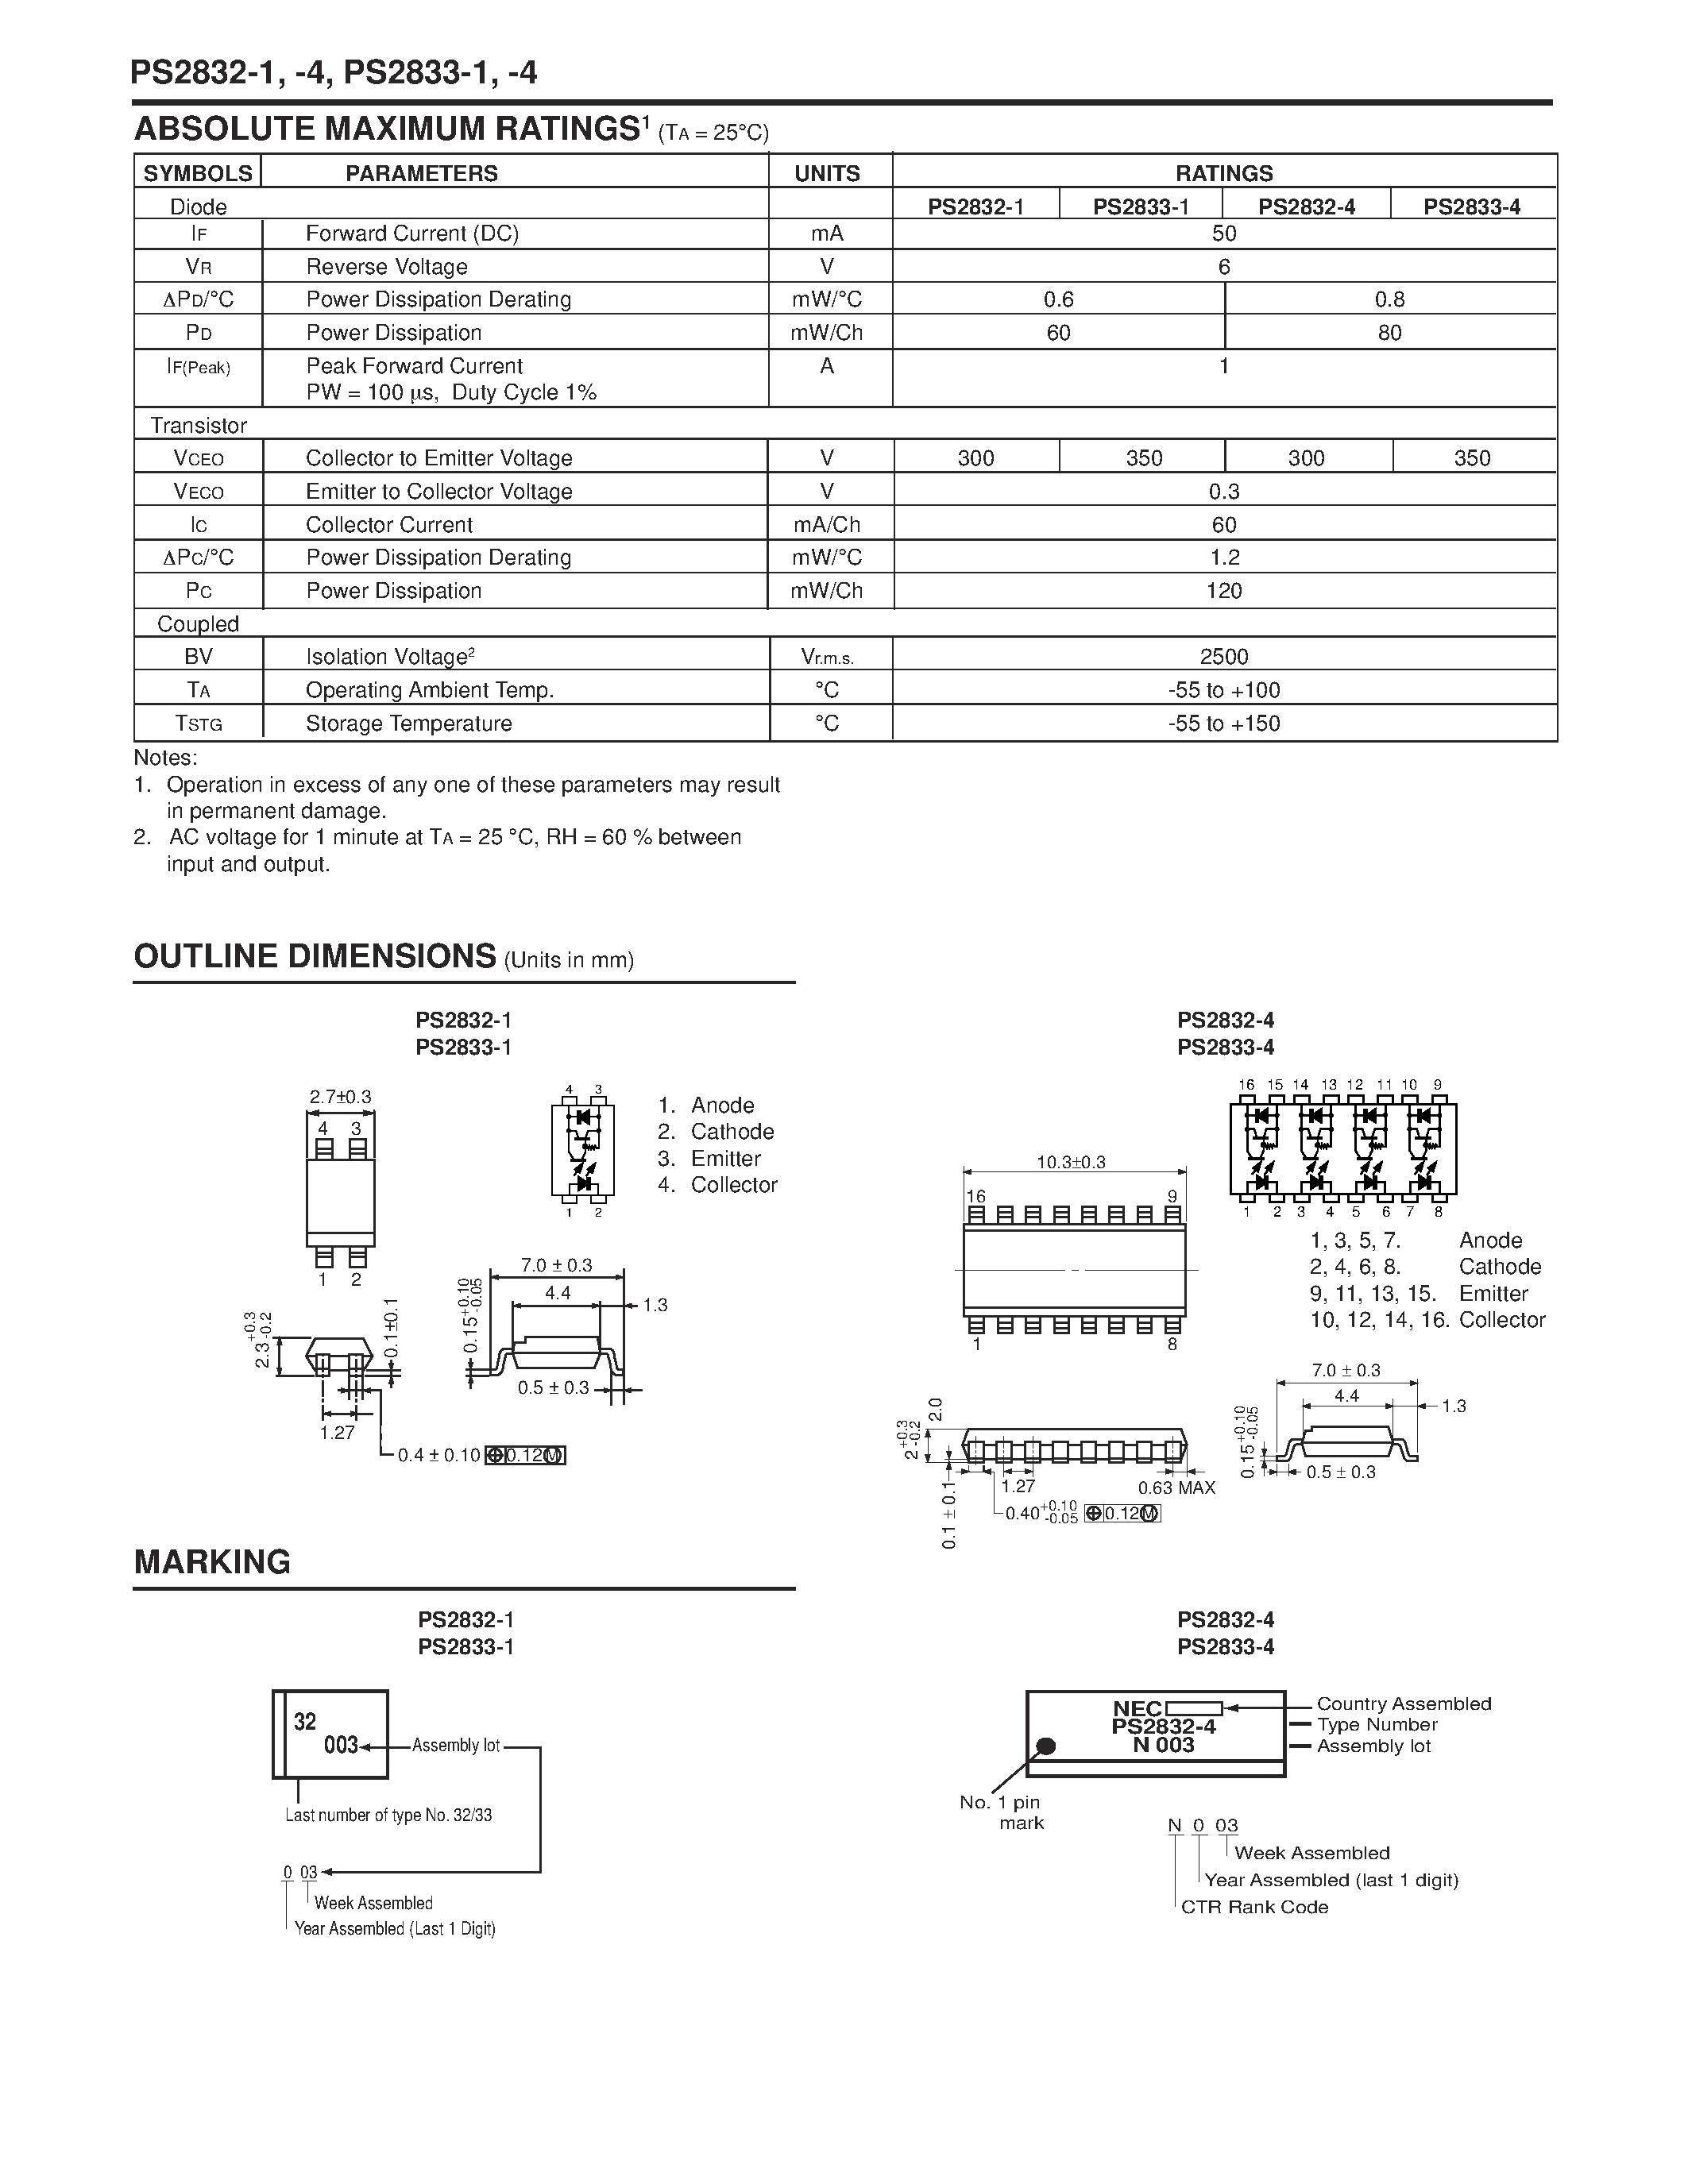 Datasheet PS2832-1-V-F3 - HIGH ISOLATION VOLTAGE HIGH COLLECTOR TO EMITTER VOLTAGE SOP MULTI OPTOCOUPLER page 2